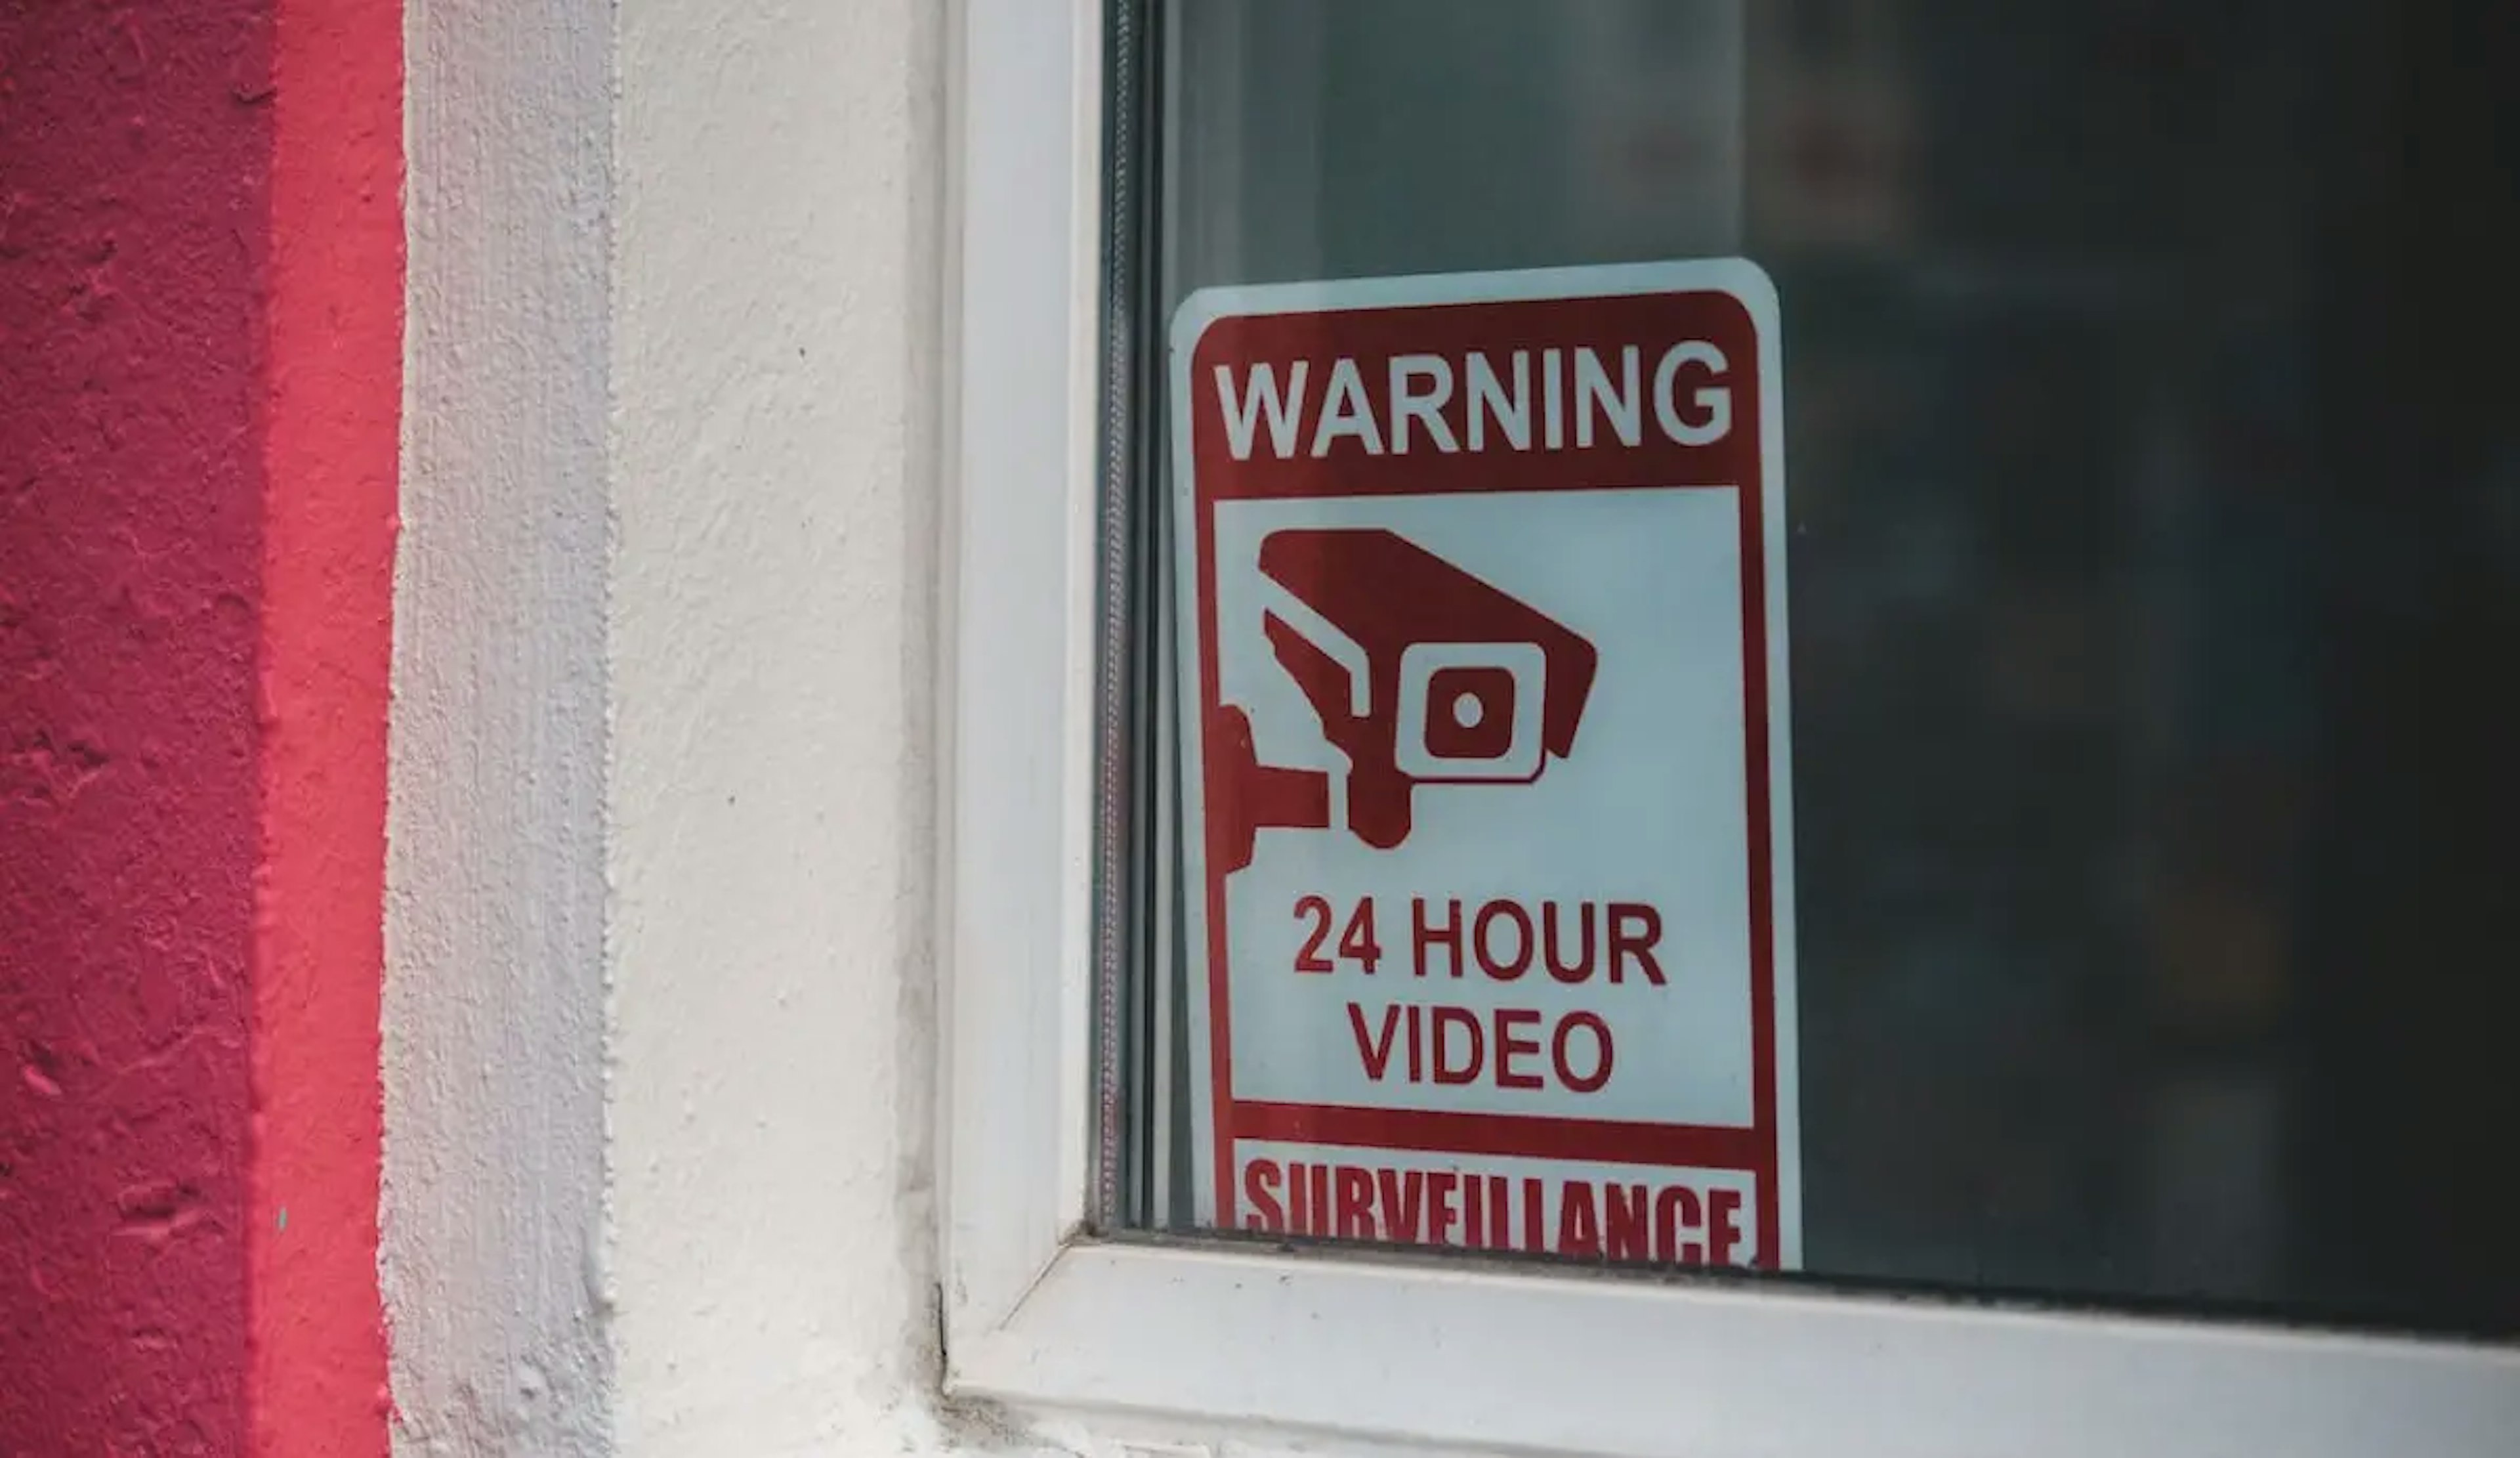 A sign with a security camera symbol and text that reads "WARNING 24 hour video surveillance"